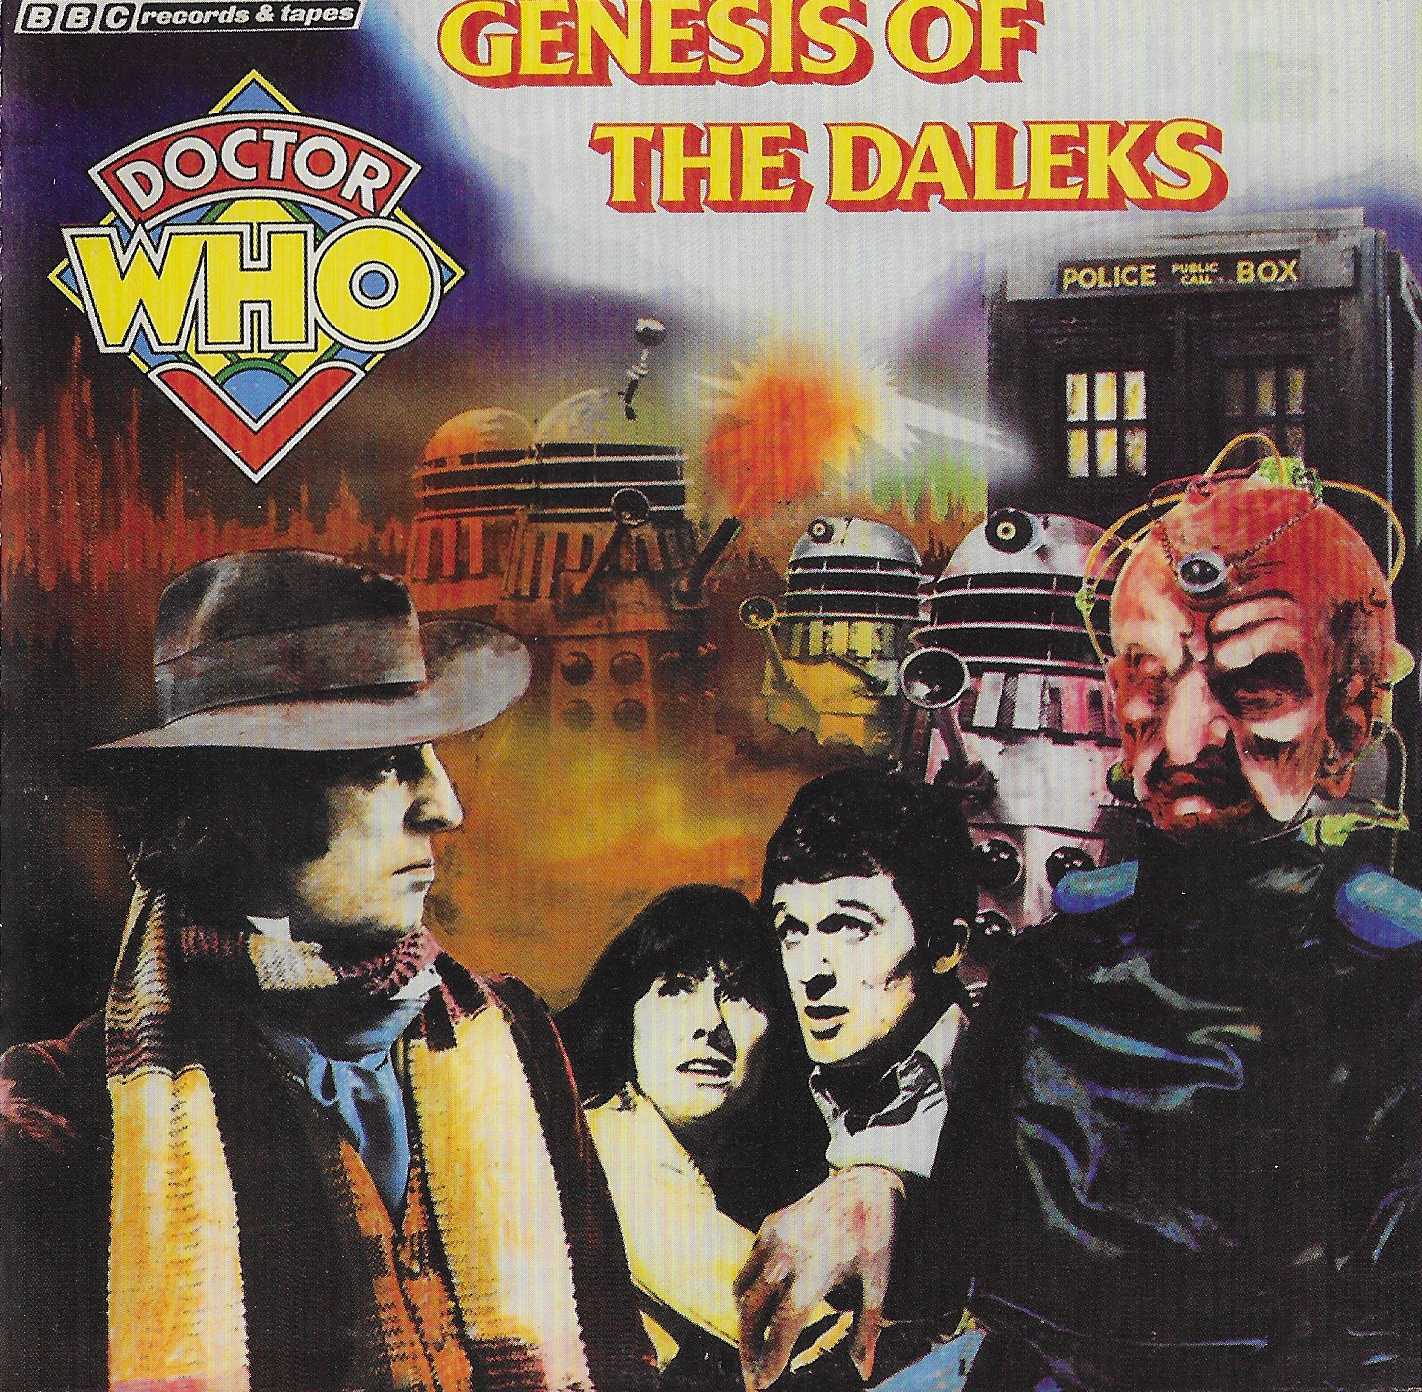 Picture of ISBN 978-1-4084-6817-3 Doctor Who - Genesis of the Daleks by artist Terry Nation from the BBC records and Tapes library